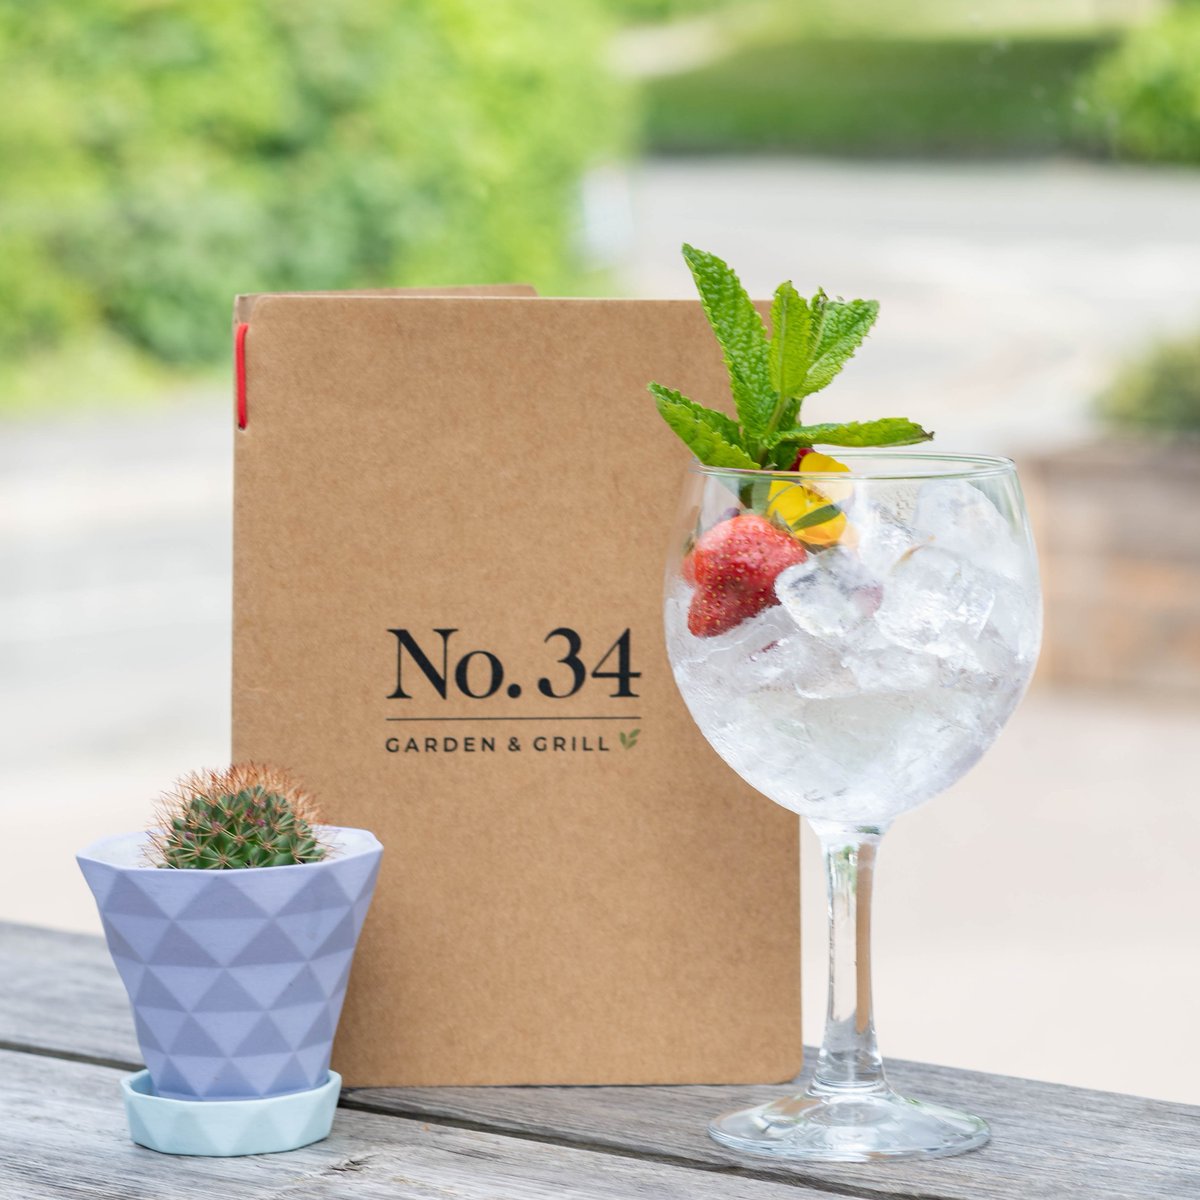 WHAT'S YOUR QUIZ DRINK? 🌱 We've all got a go-to drink when we go out for a #QuizNight 🍹 What's yours? Let us know in the comments 👇🏻 Book your team table for our Quiz Night while you're at it: no34gardenandgrill.co.uk/book @buyin2warwick #BuyIn2Warwick #Quiz #No34 📷 @StuMPhoto